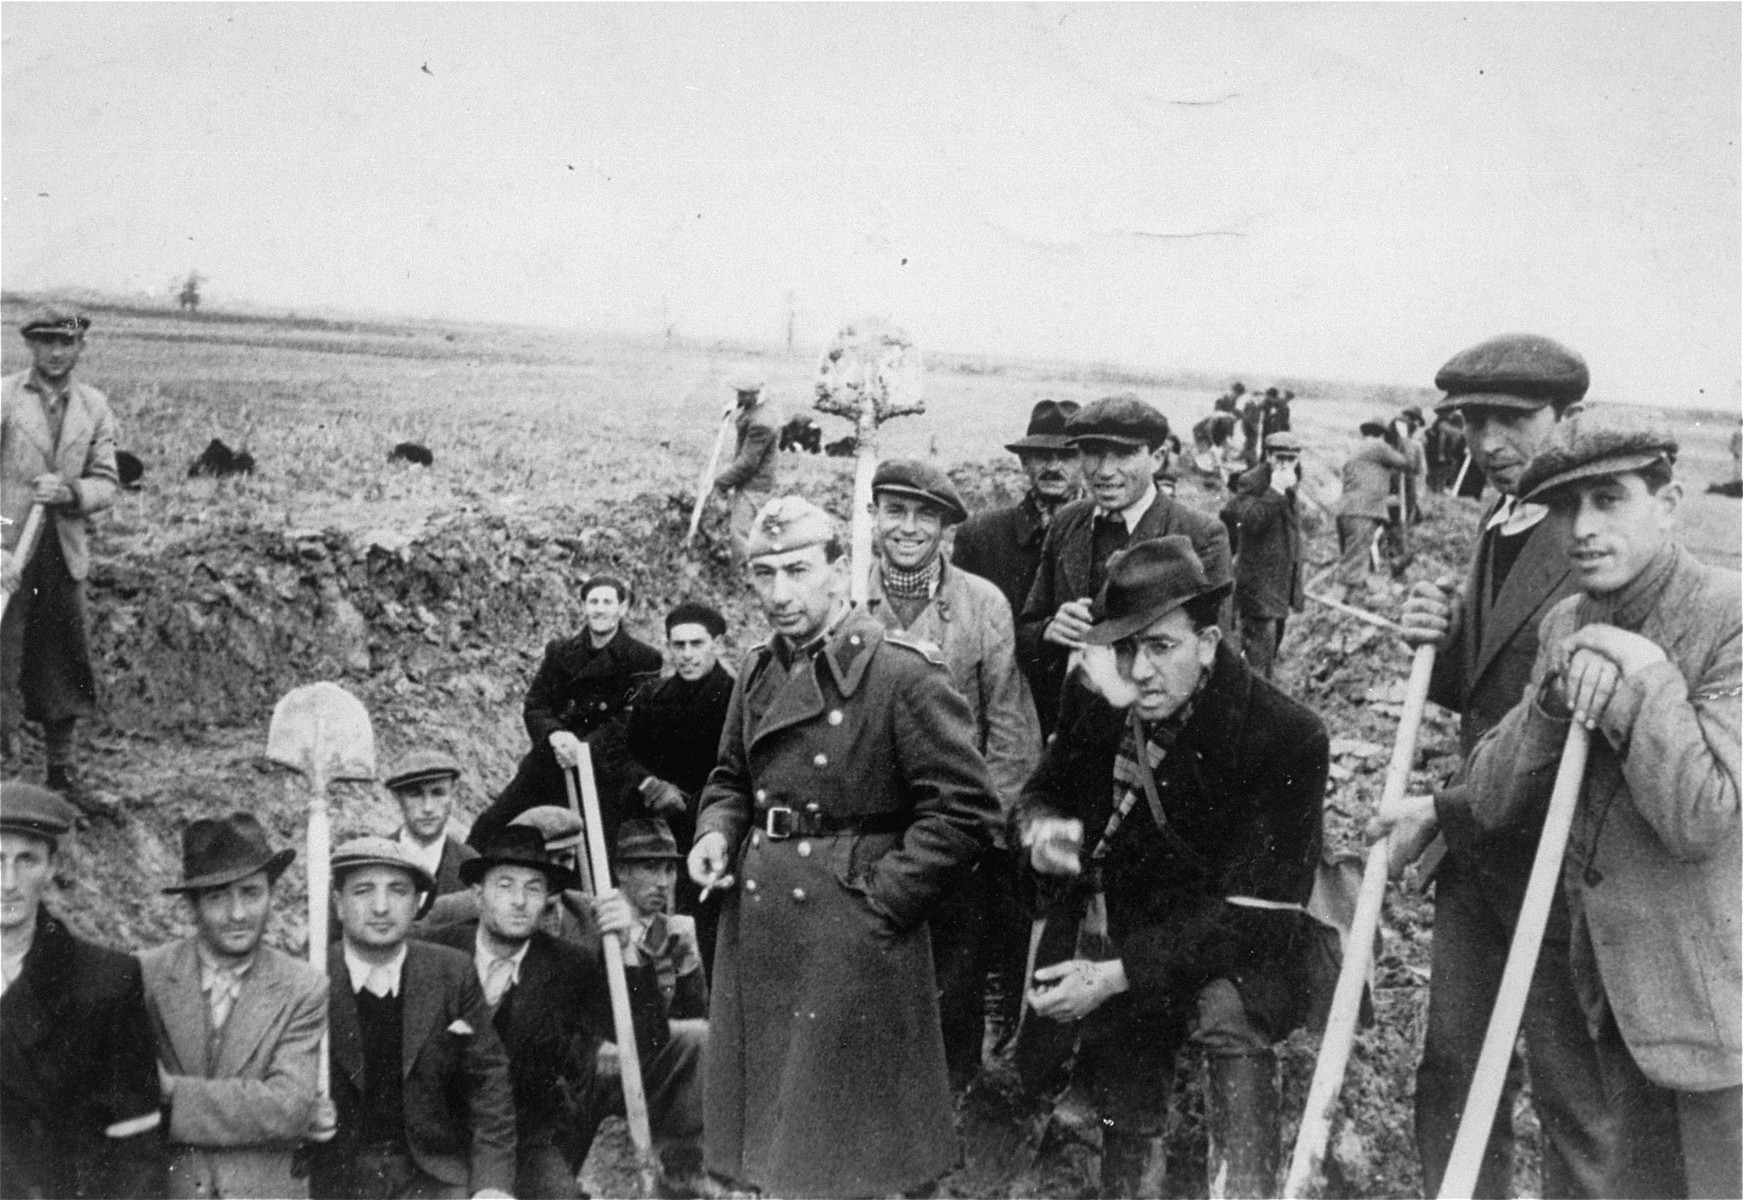 Jewish members of an Hungarian labor battalion pose with shovels at a work site.

Among those pictured is Salomon Belo from the town of Bene (third from the left).